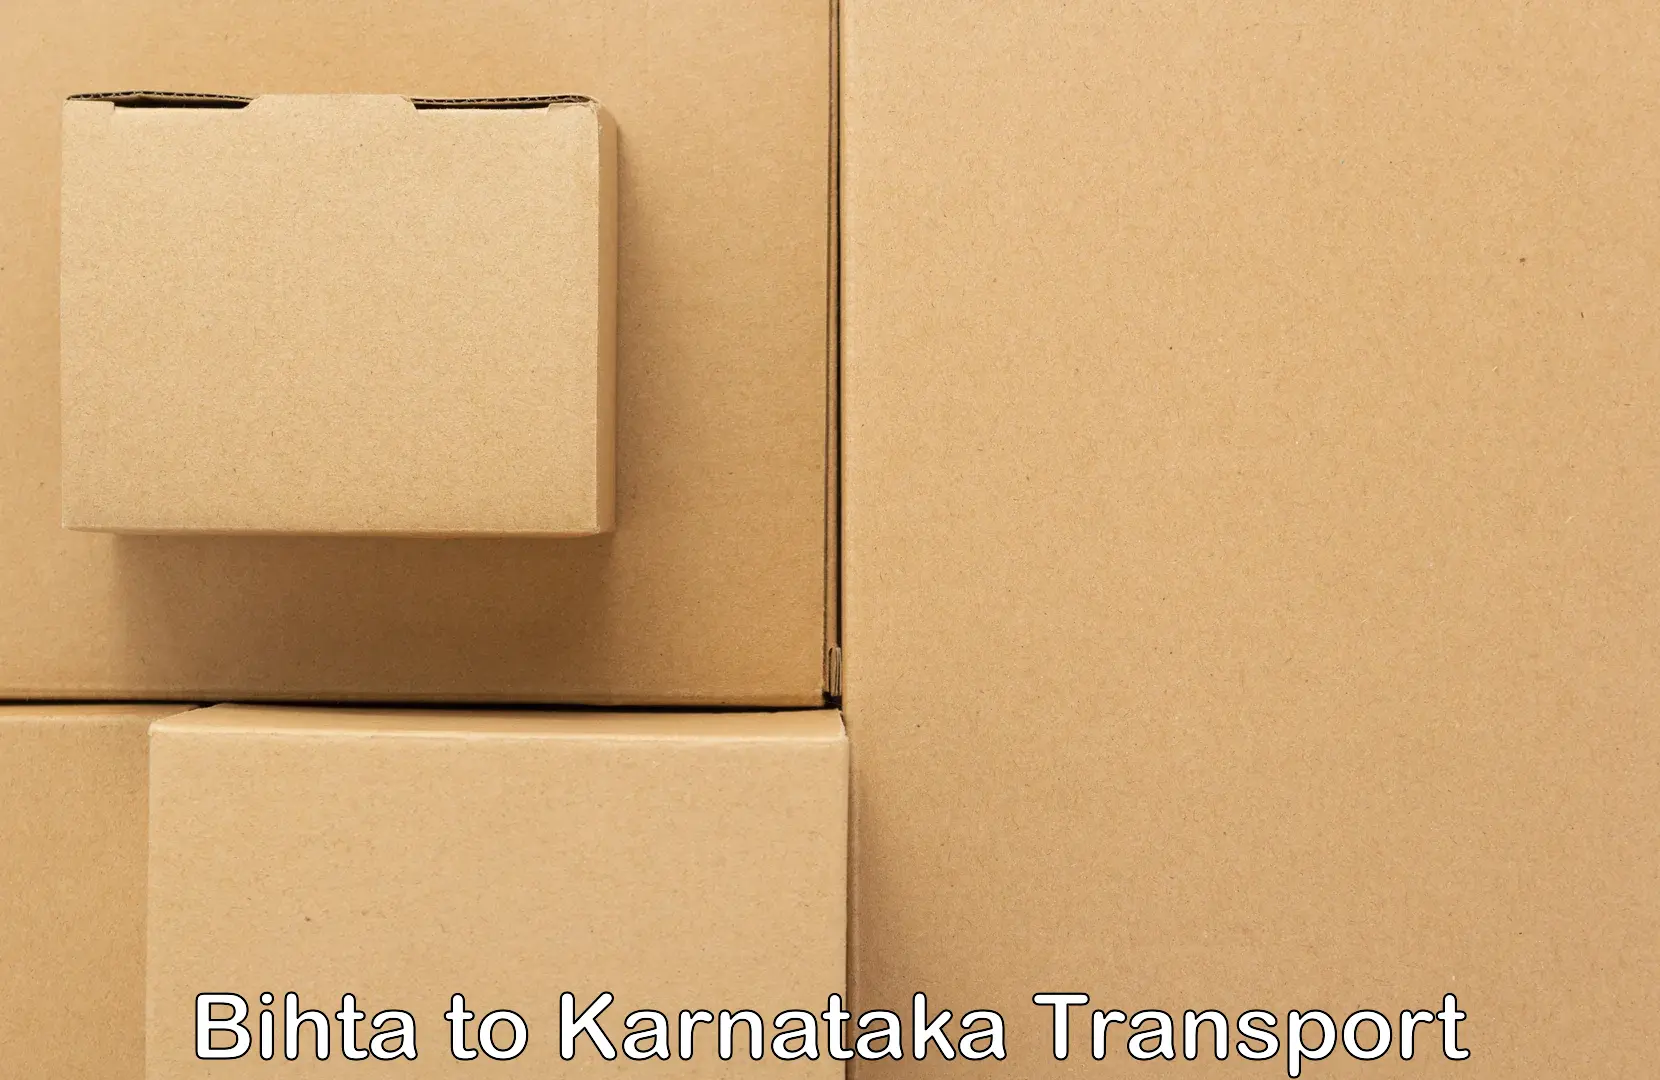 Package delivery services in Bihta to Karnataka